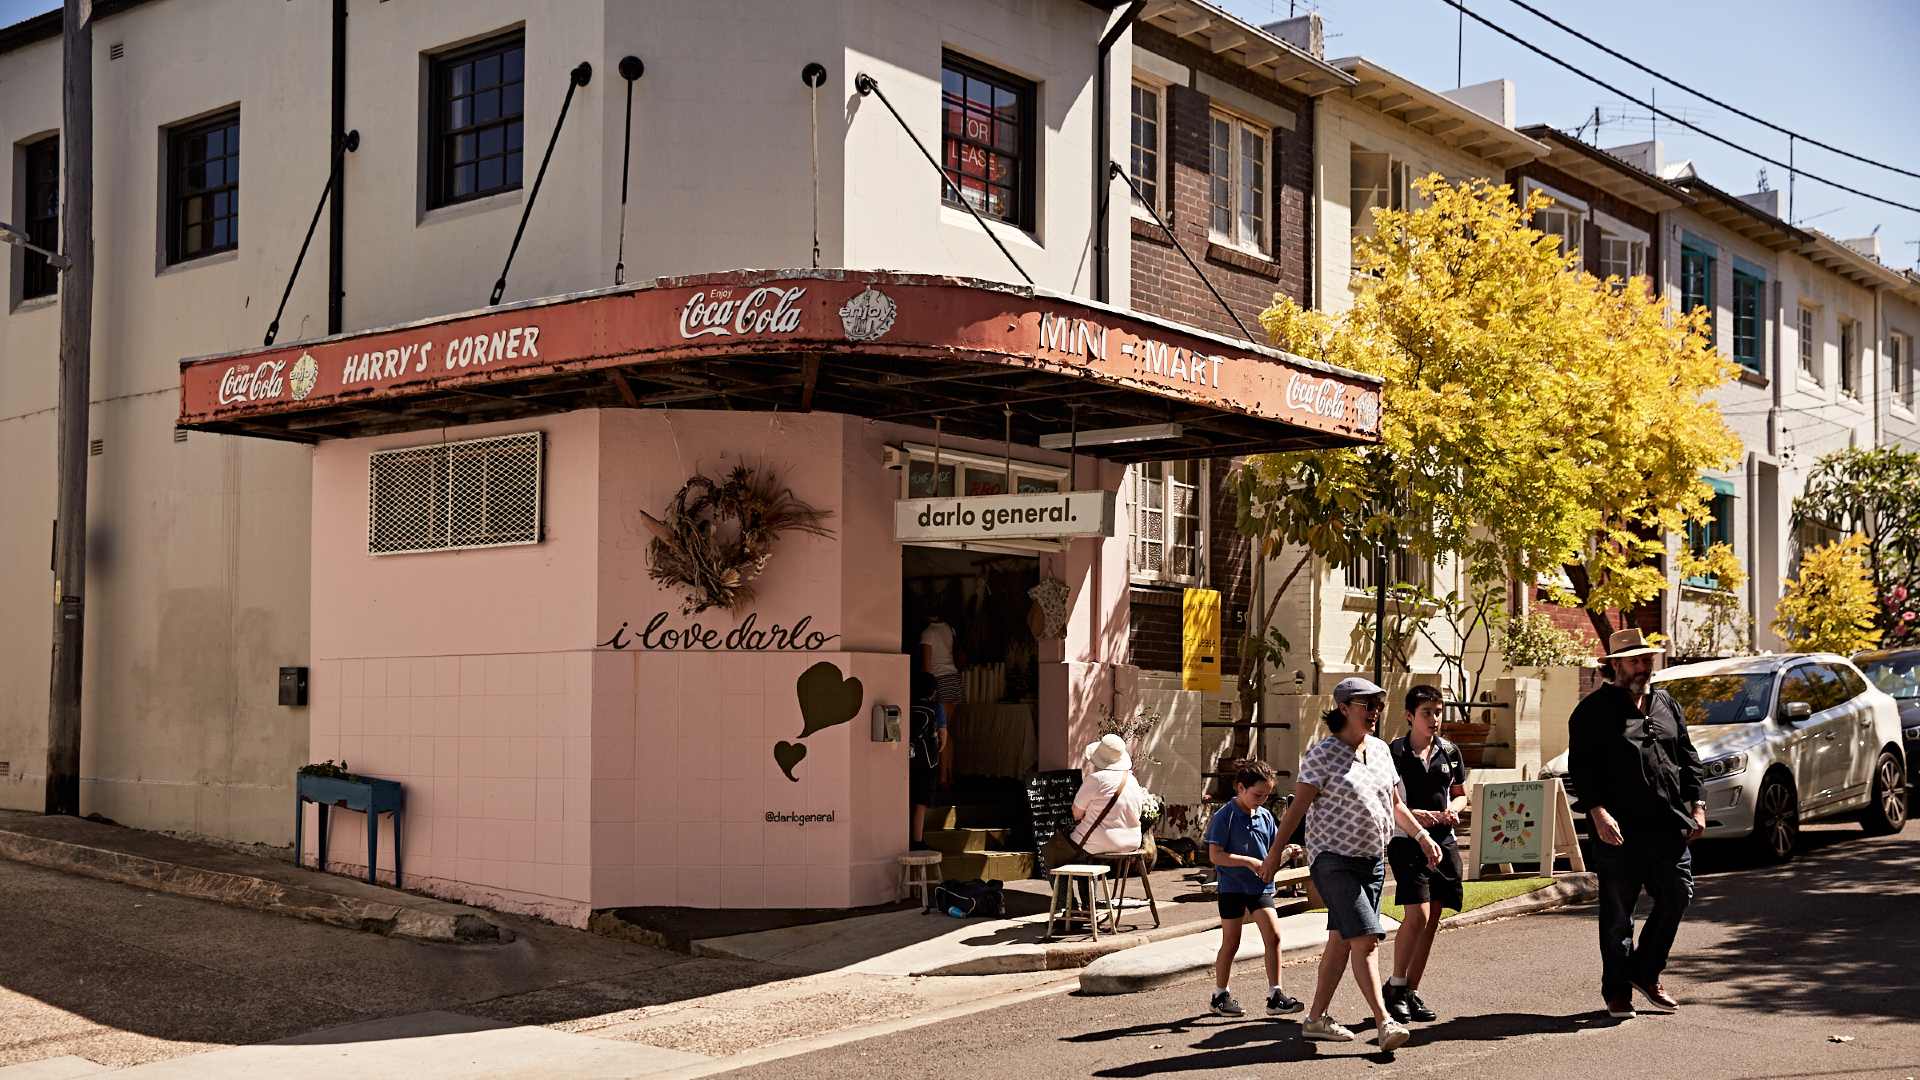 The Most Popular Cafes in Sydney for 2022